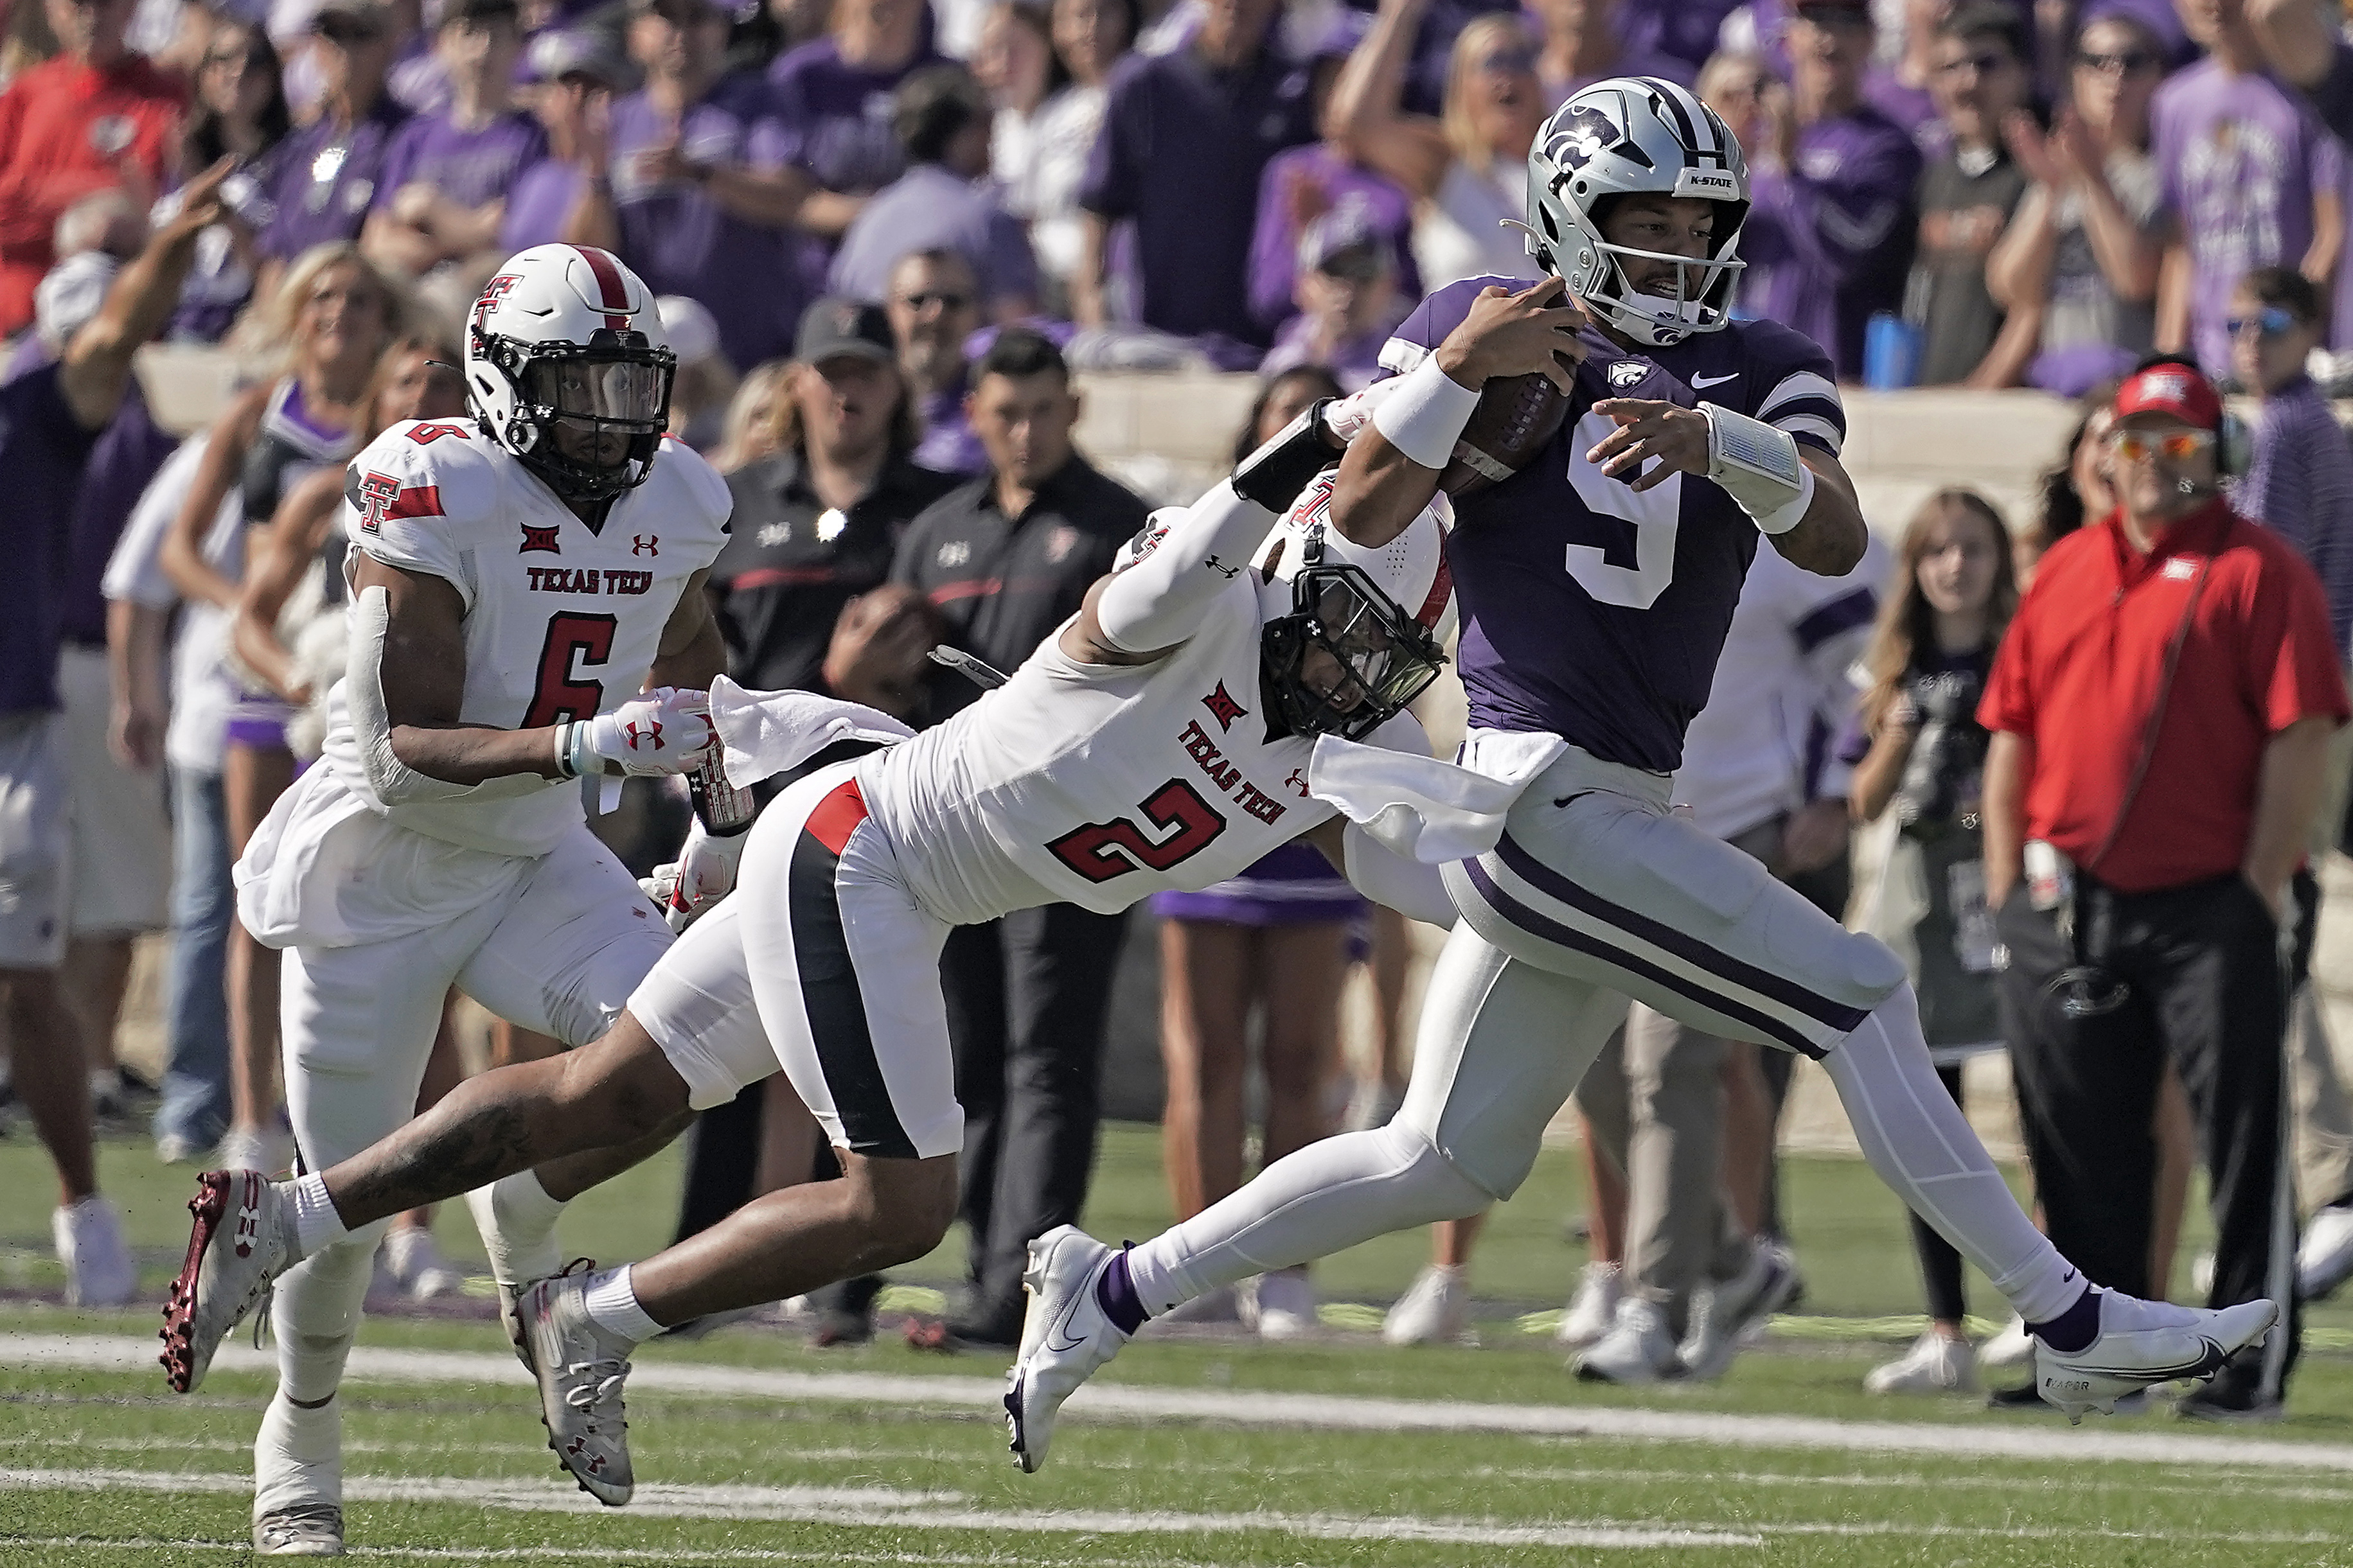 Five takeaways from Texas Tech's 44-38 loss to Kansas State